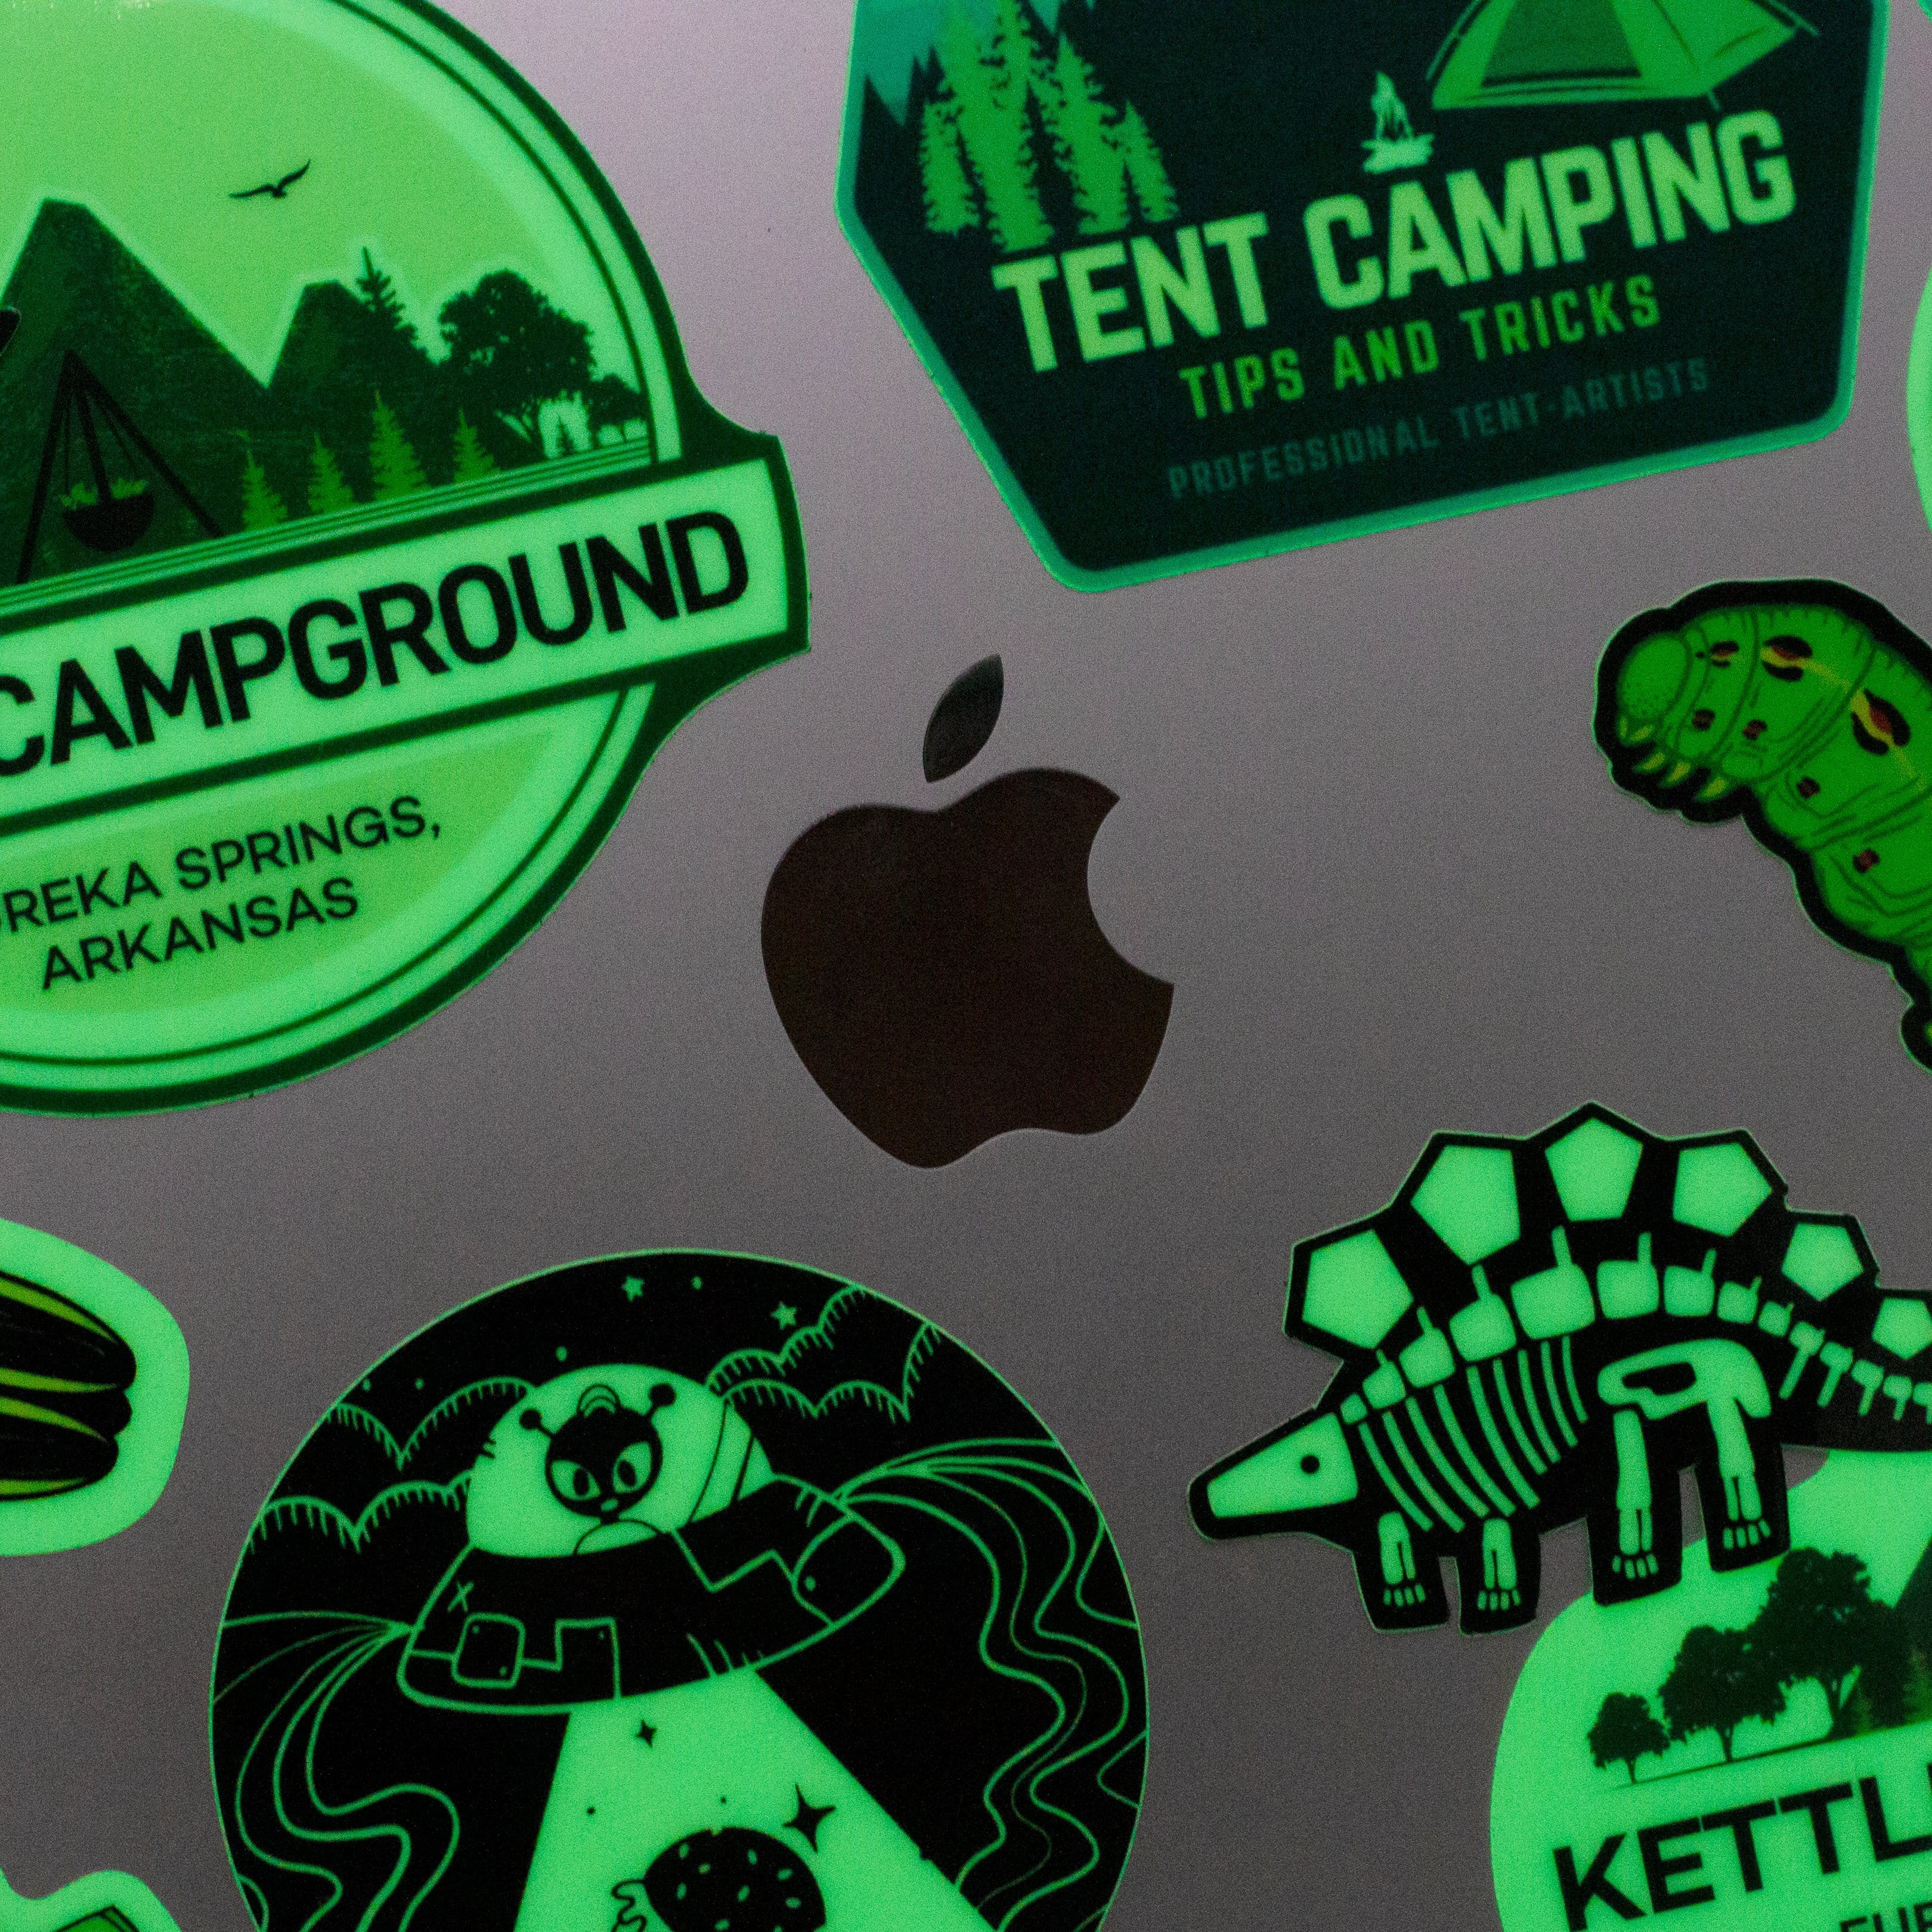 Custom glow in the dark stickers for a campground